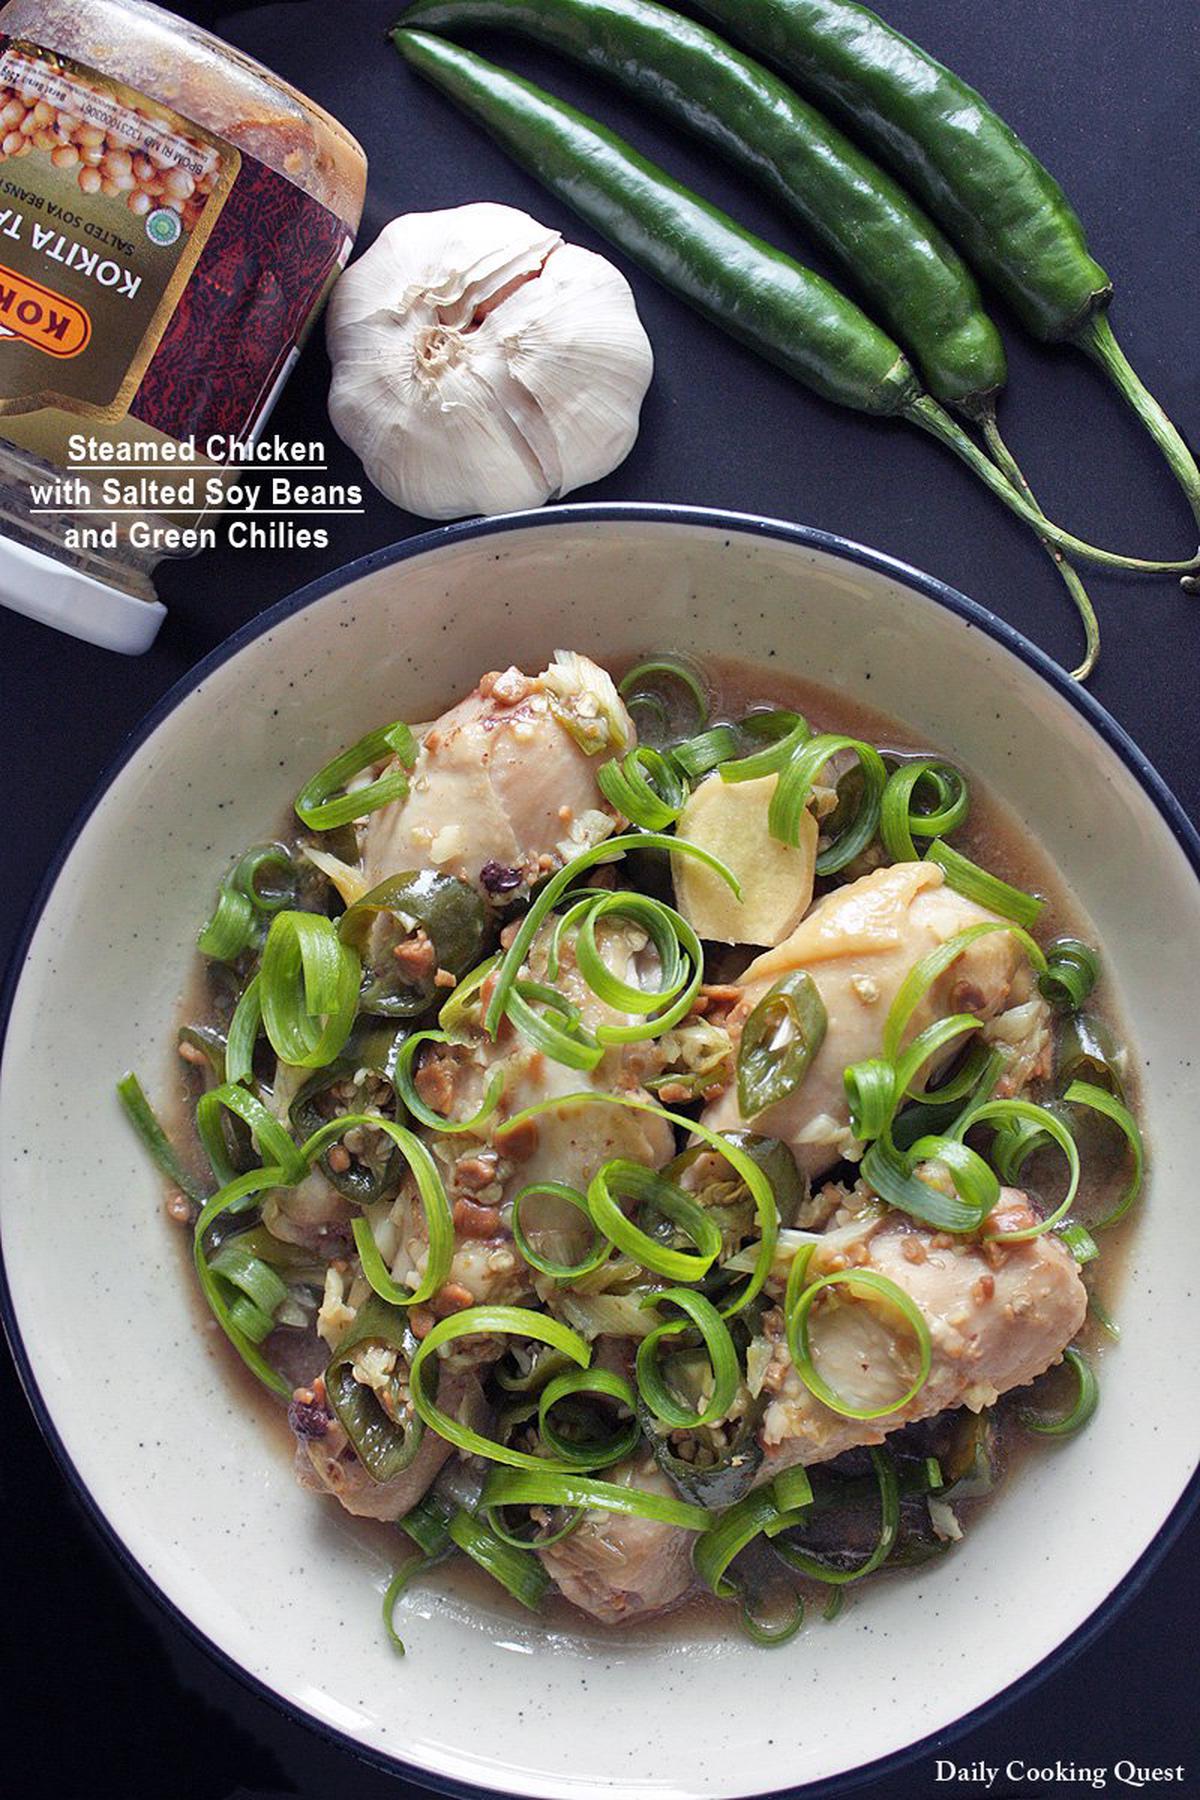 Steamed Chicken with Salted Soy Beans and Green Chilies